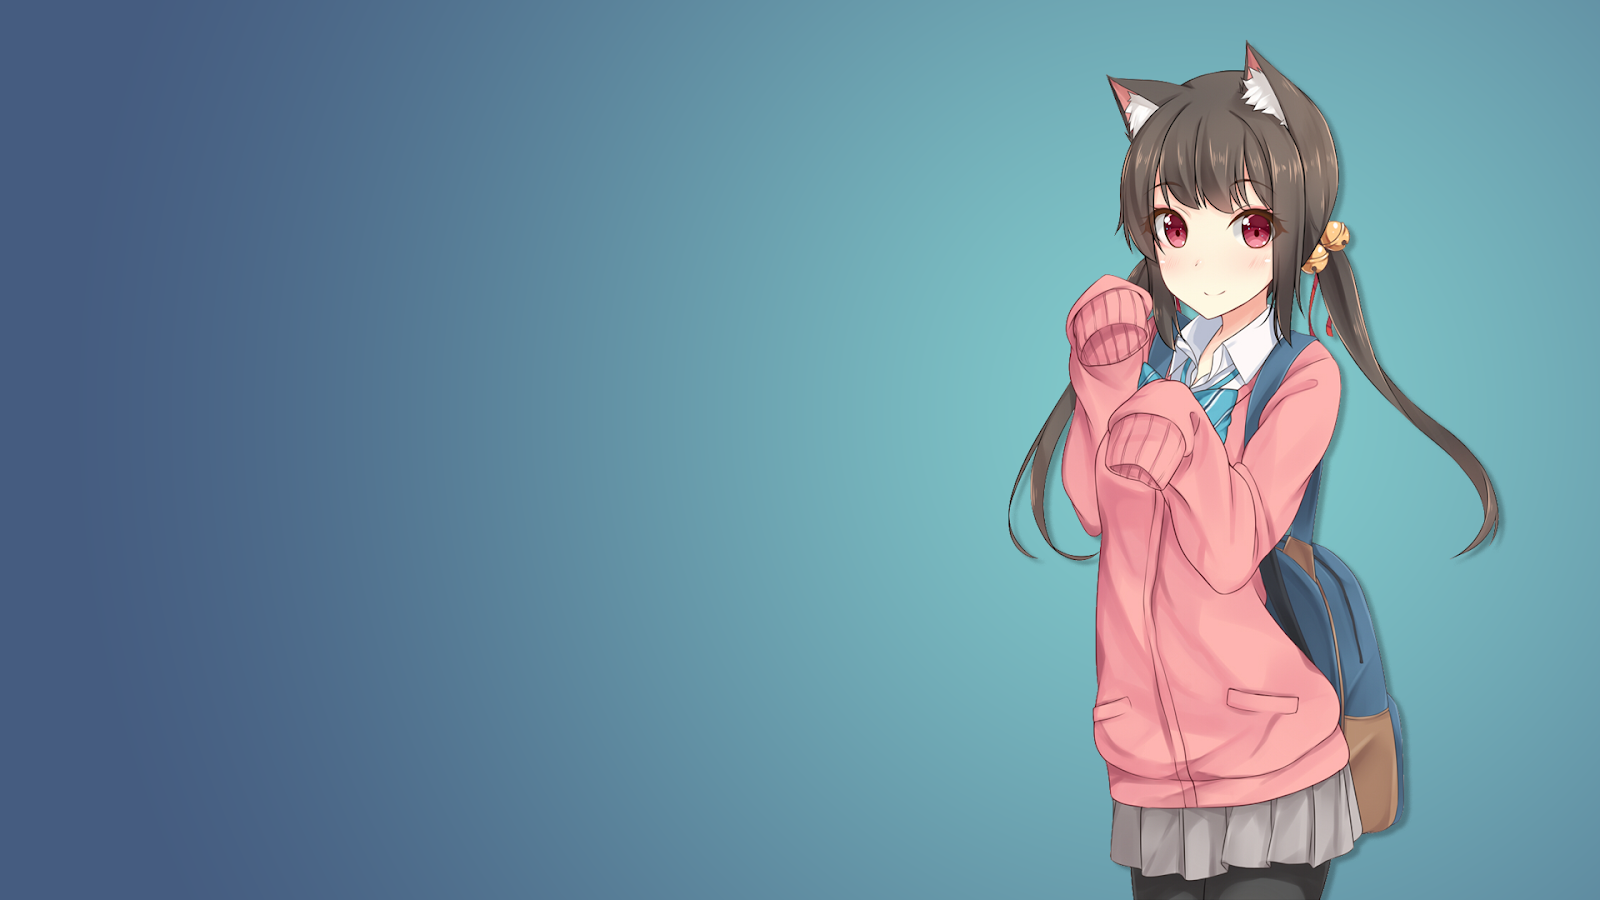 Cat Girl Wallpaper High Quality Desktop, iphone and android